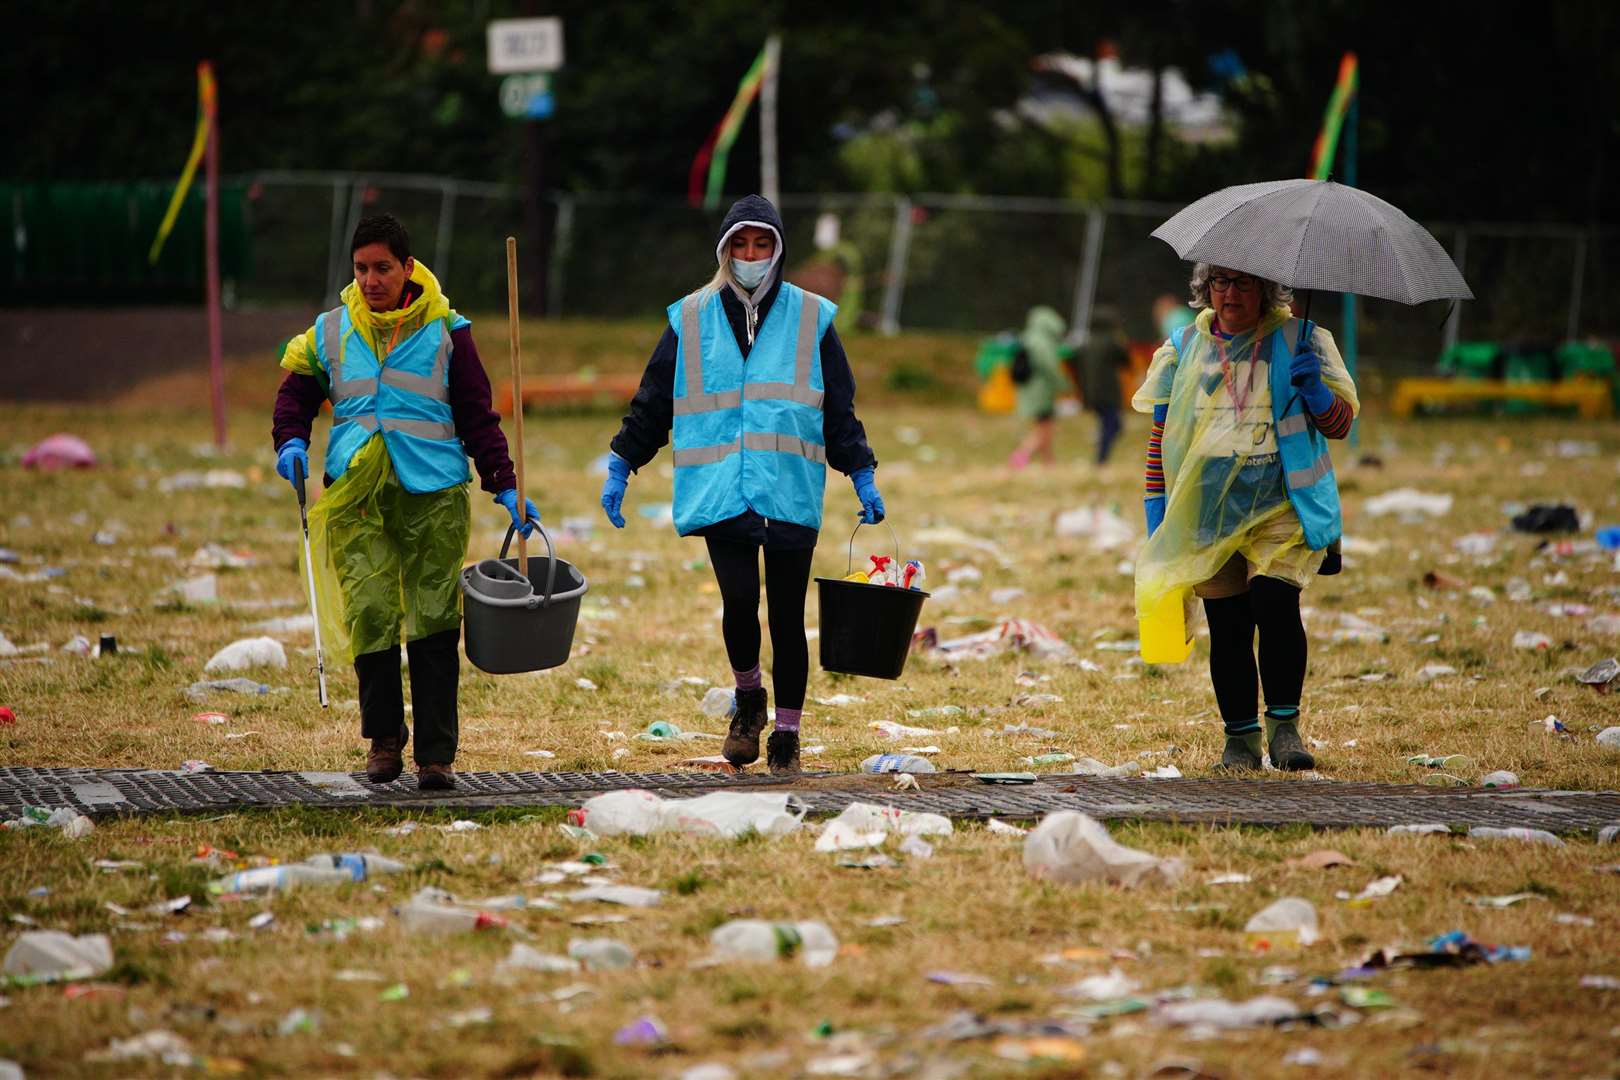 Litter-pickers work to clear the mess (Ben Birchall/PA)